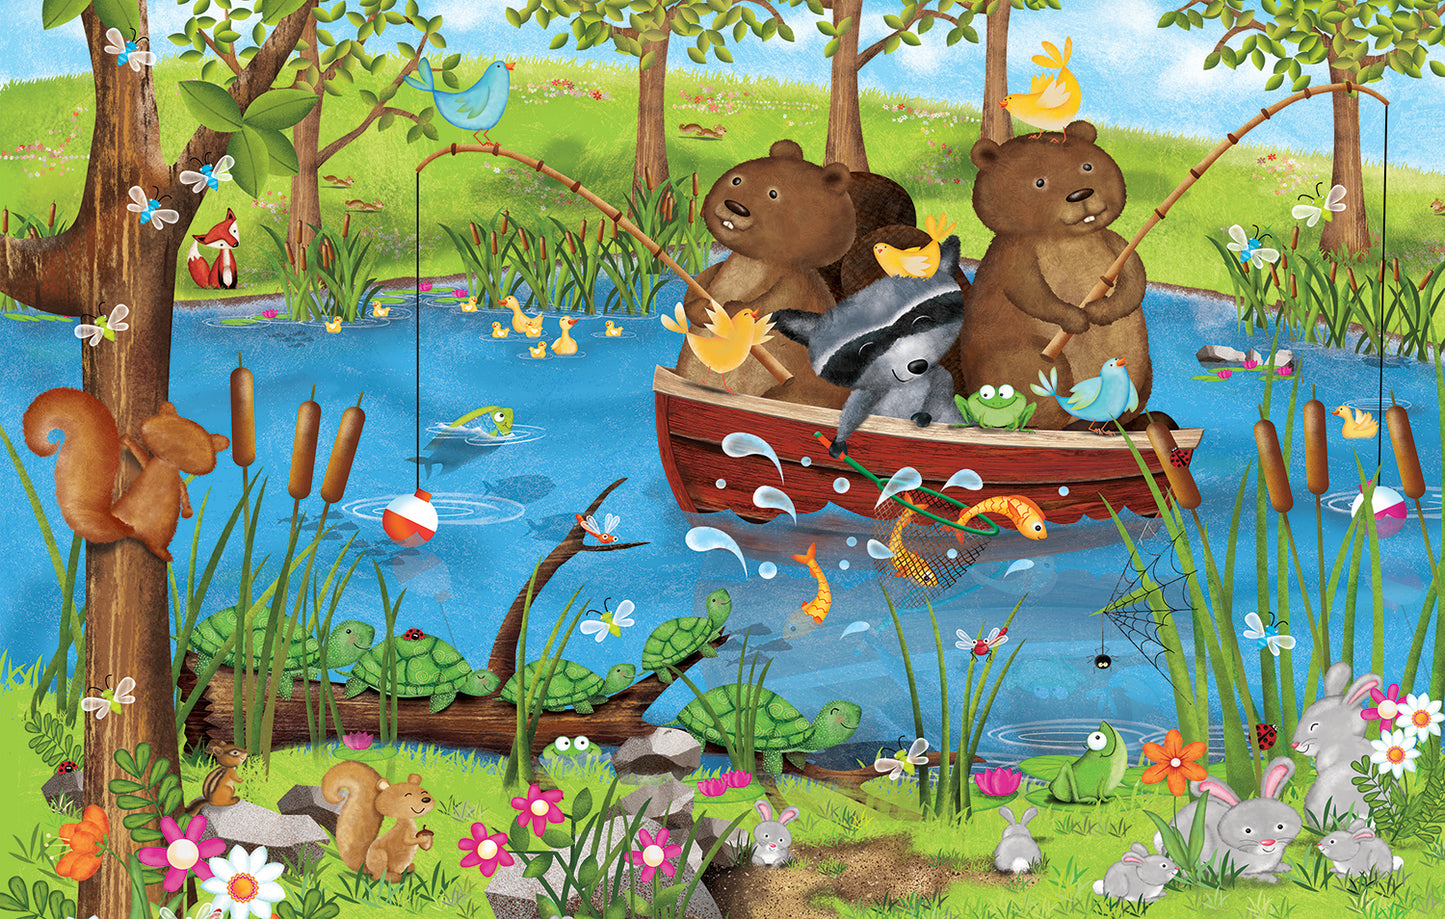 Going Fishing - 100 Piece Jigsaw Puzzle